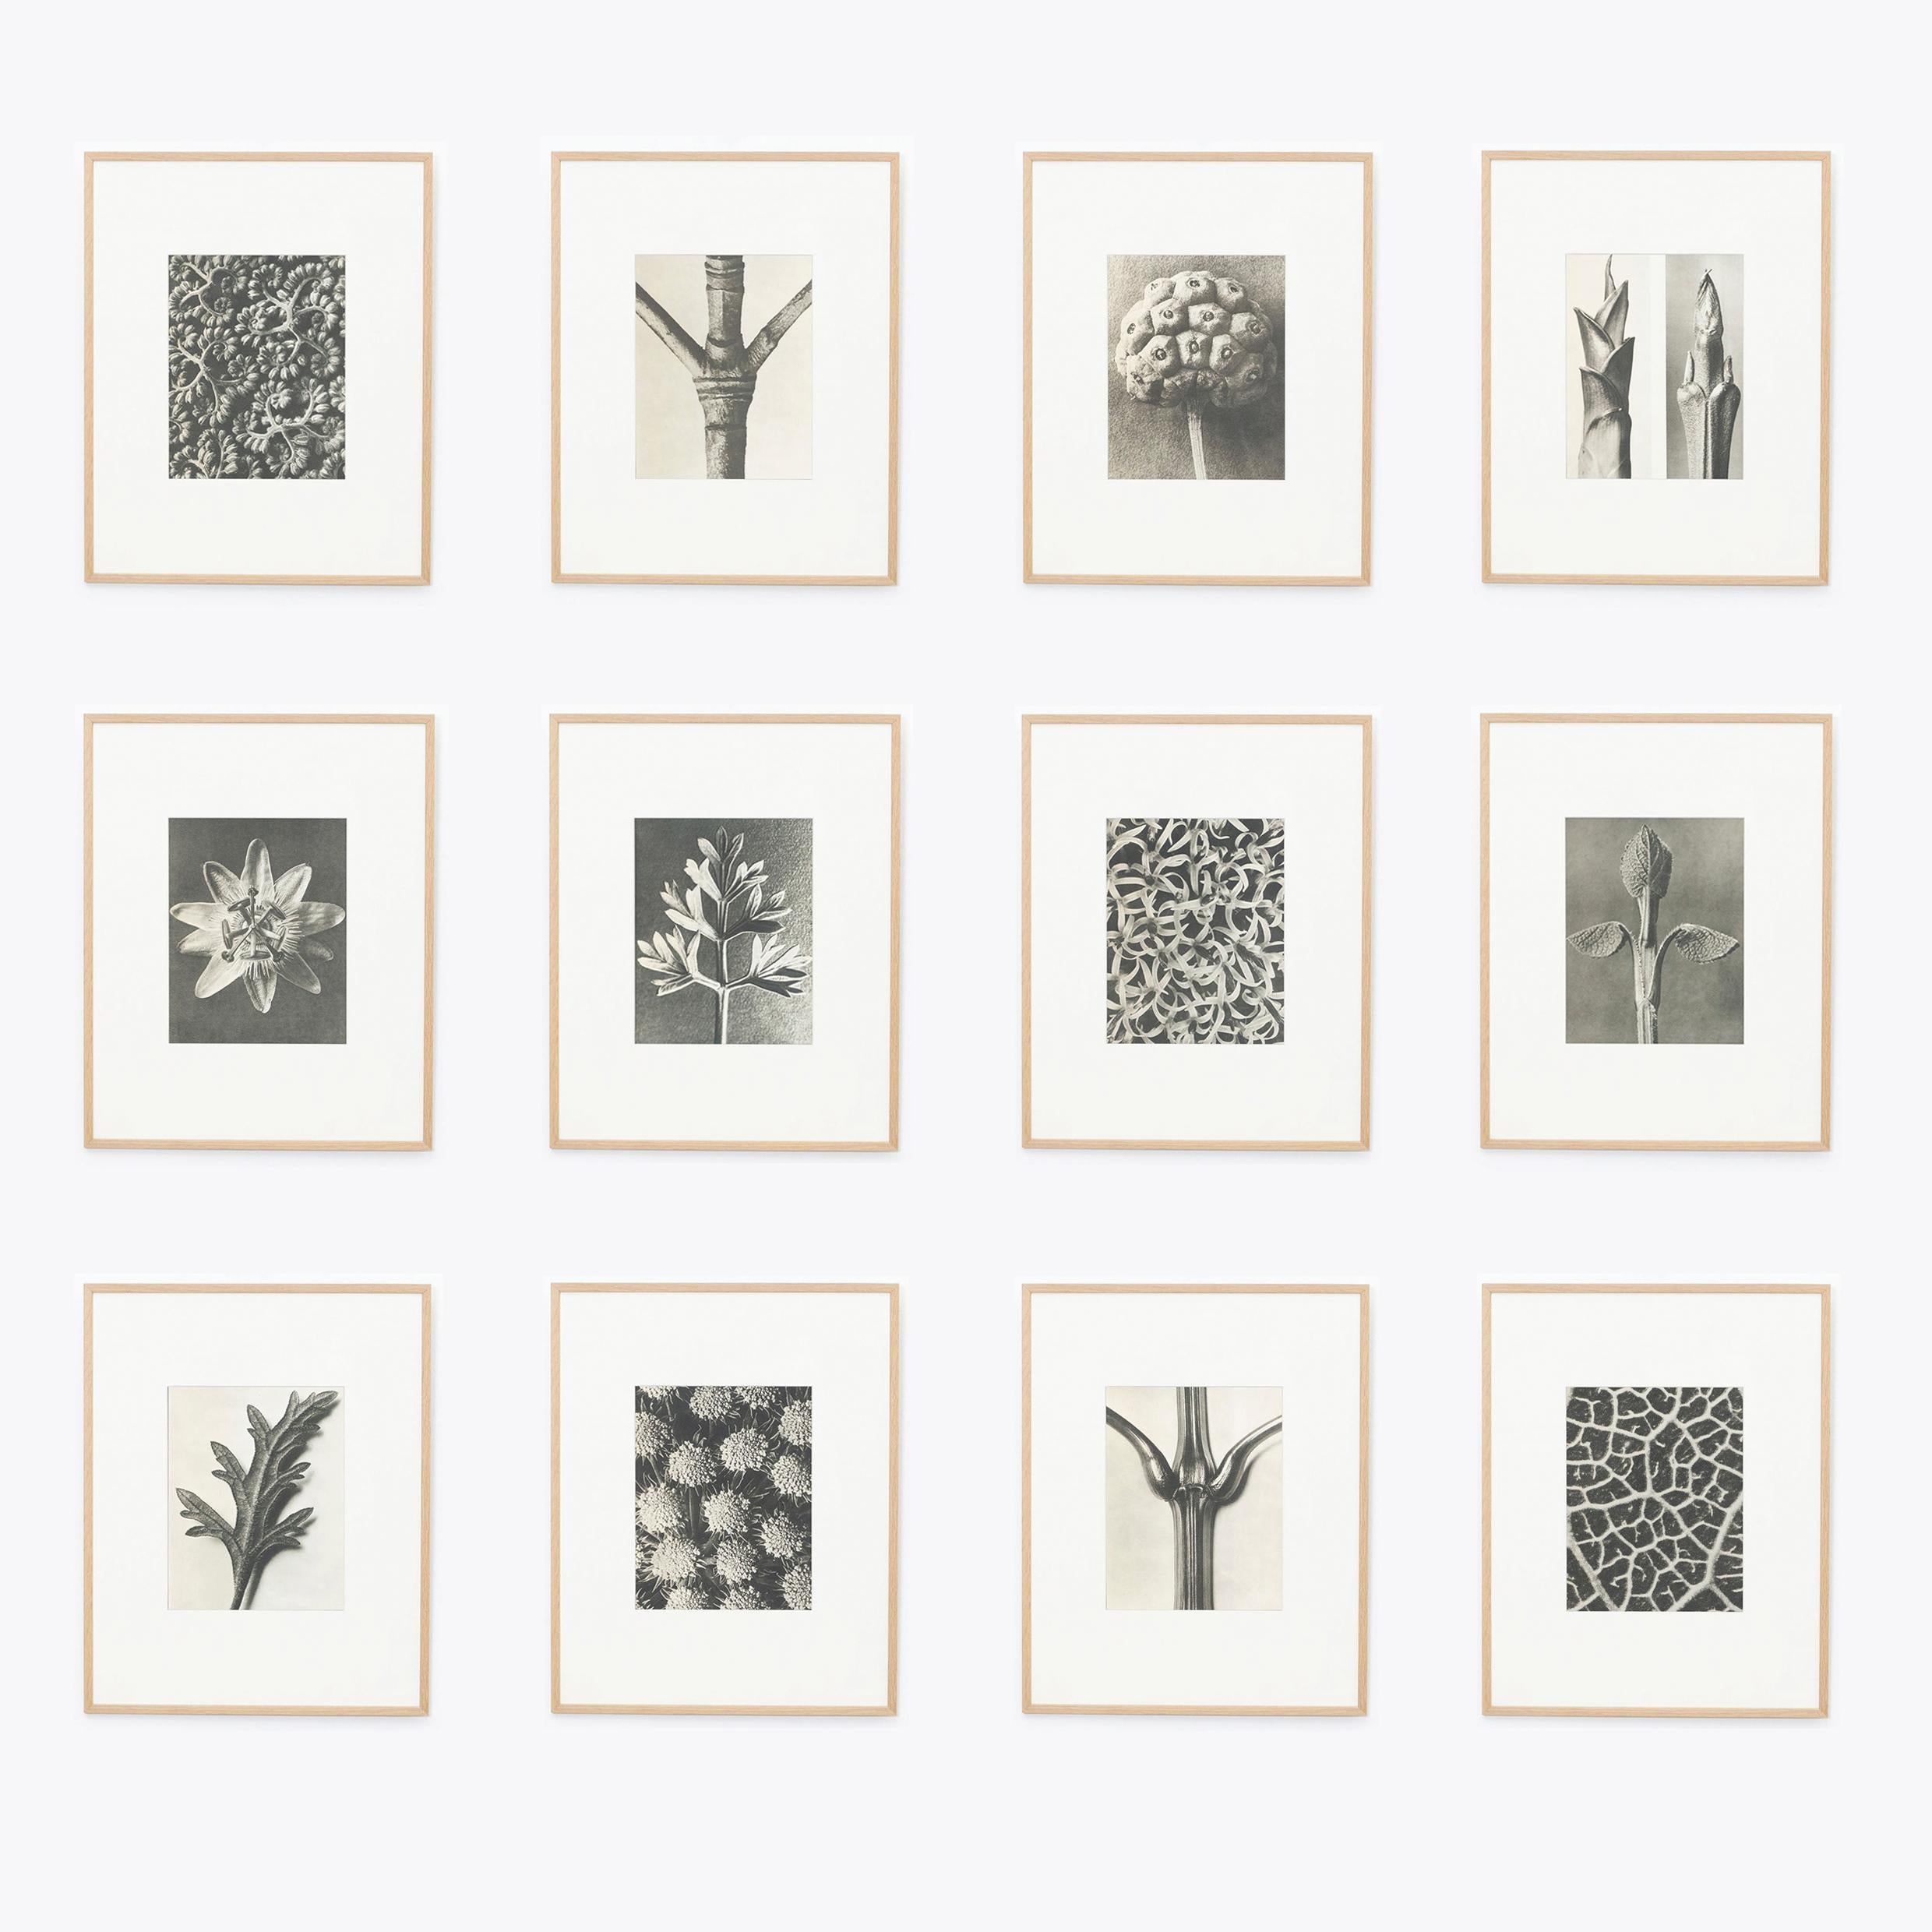 Set of twelve black and white photogravures.
Karl Blossfeldt Photogravure from the edition of the book 'Wunder in der Natur' in 1942.

In original condition, with minor wear consistent with age and use, preserving a beautiful patina.

Karl